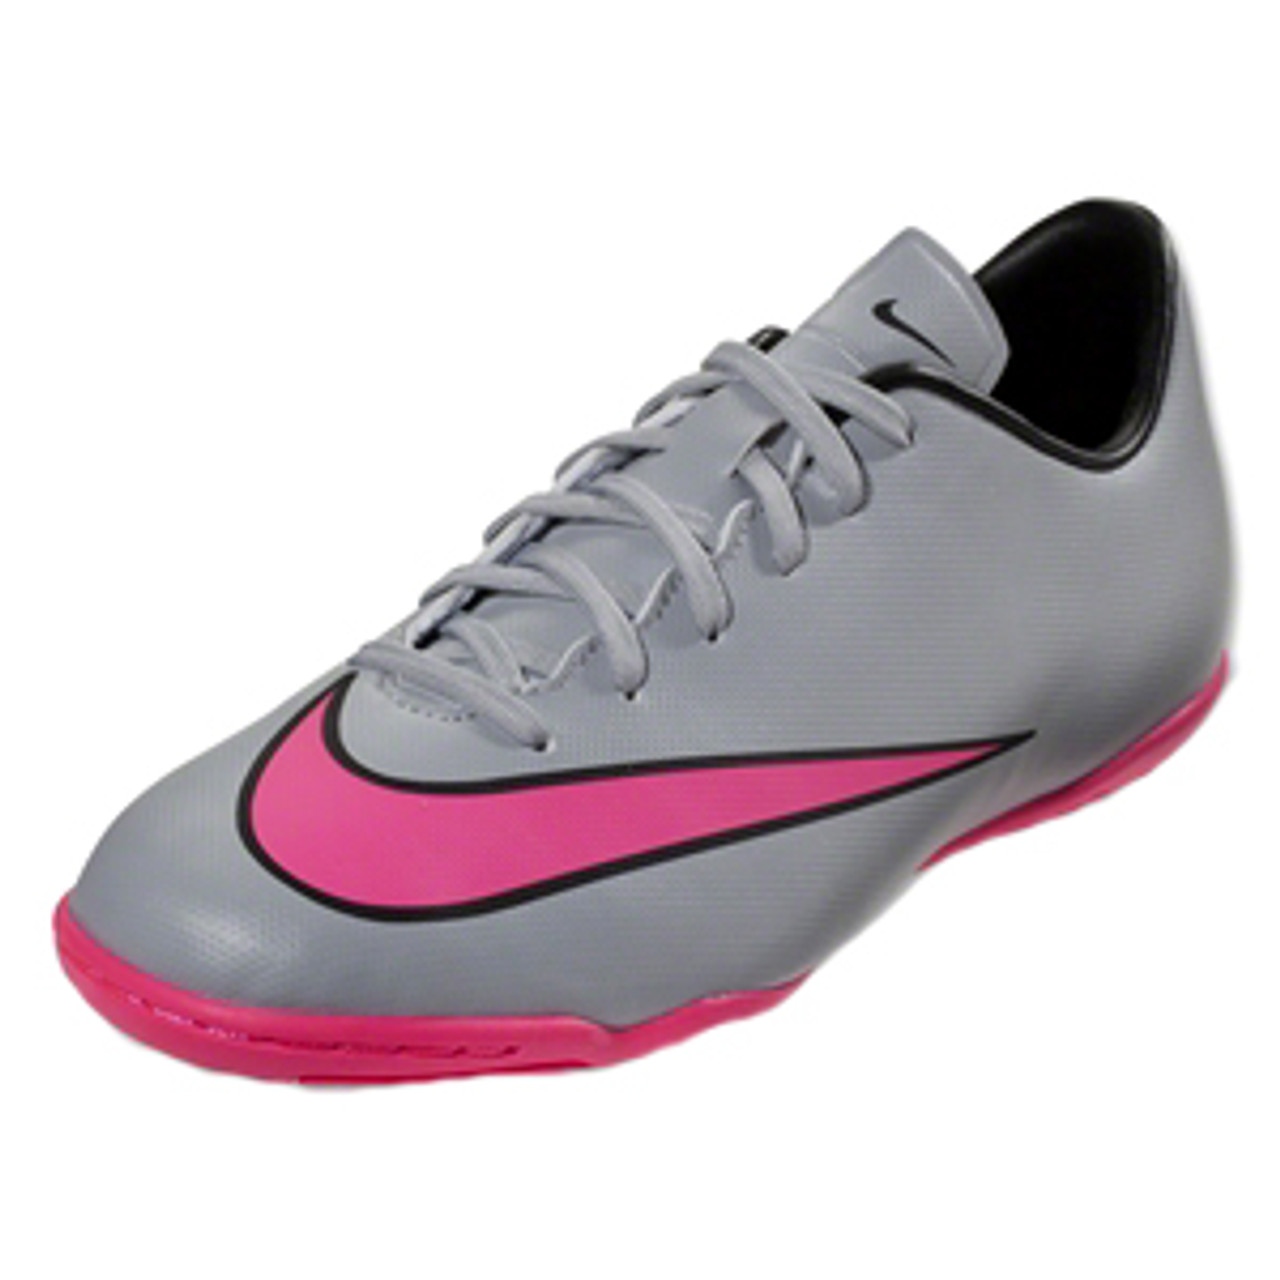 NIKE MERCURIAL wolf grey/pink indoor soccer shoes Soccer Plus